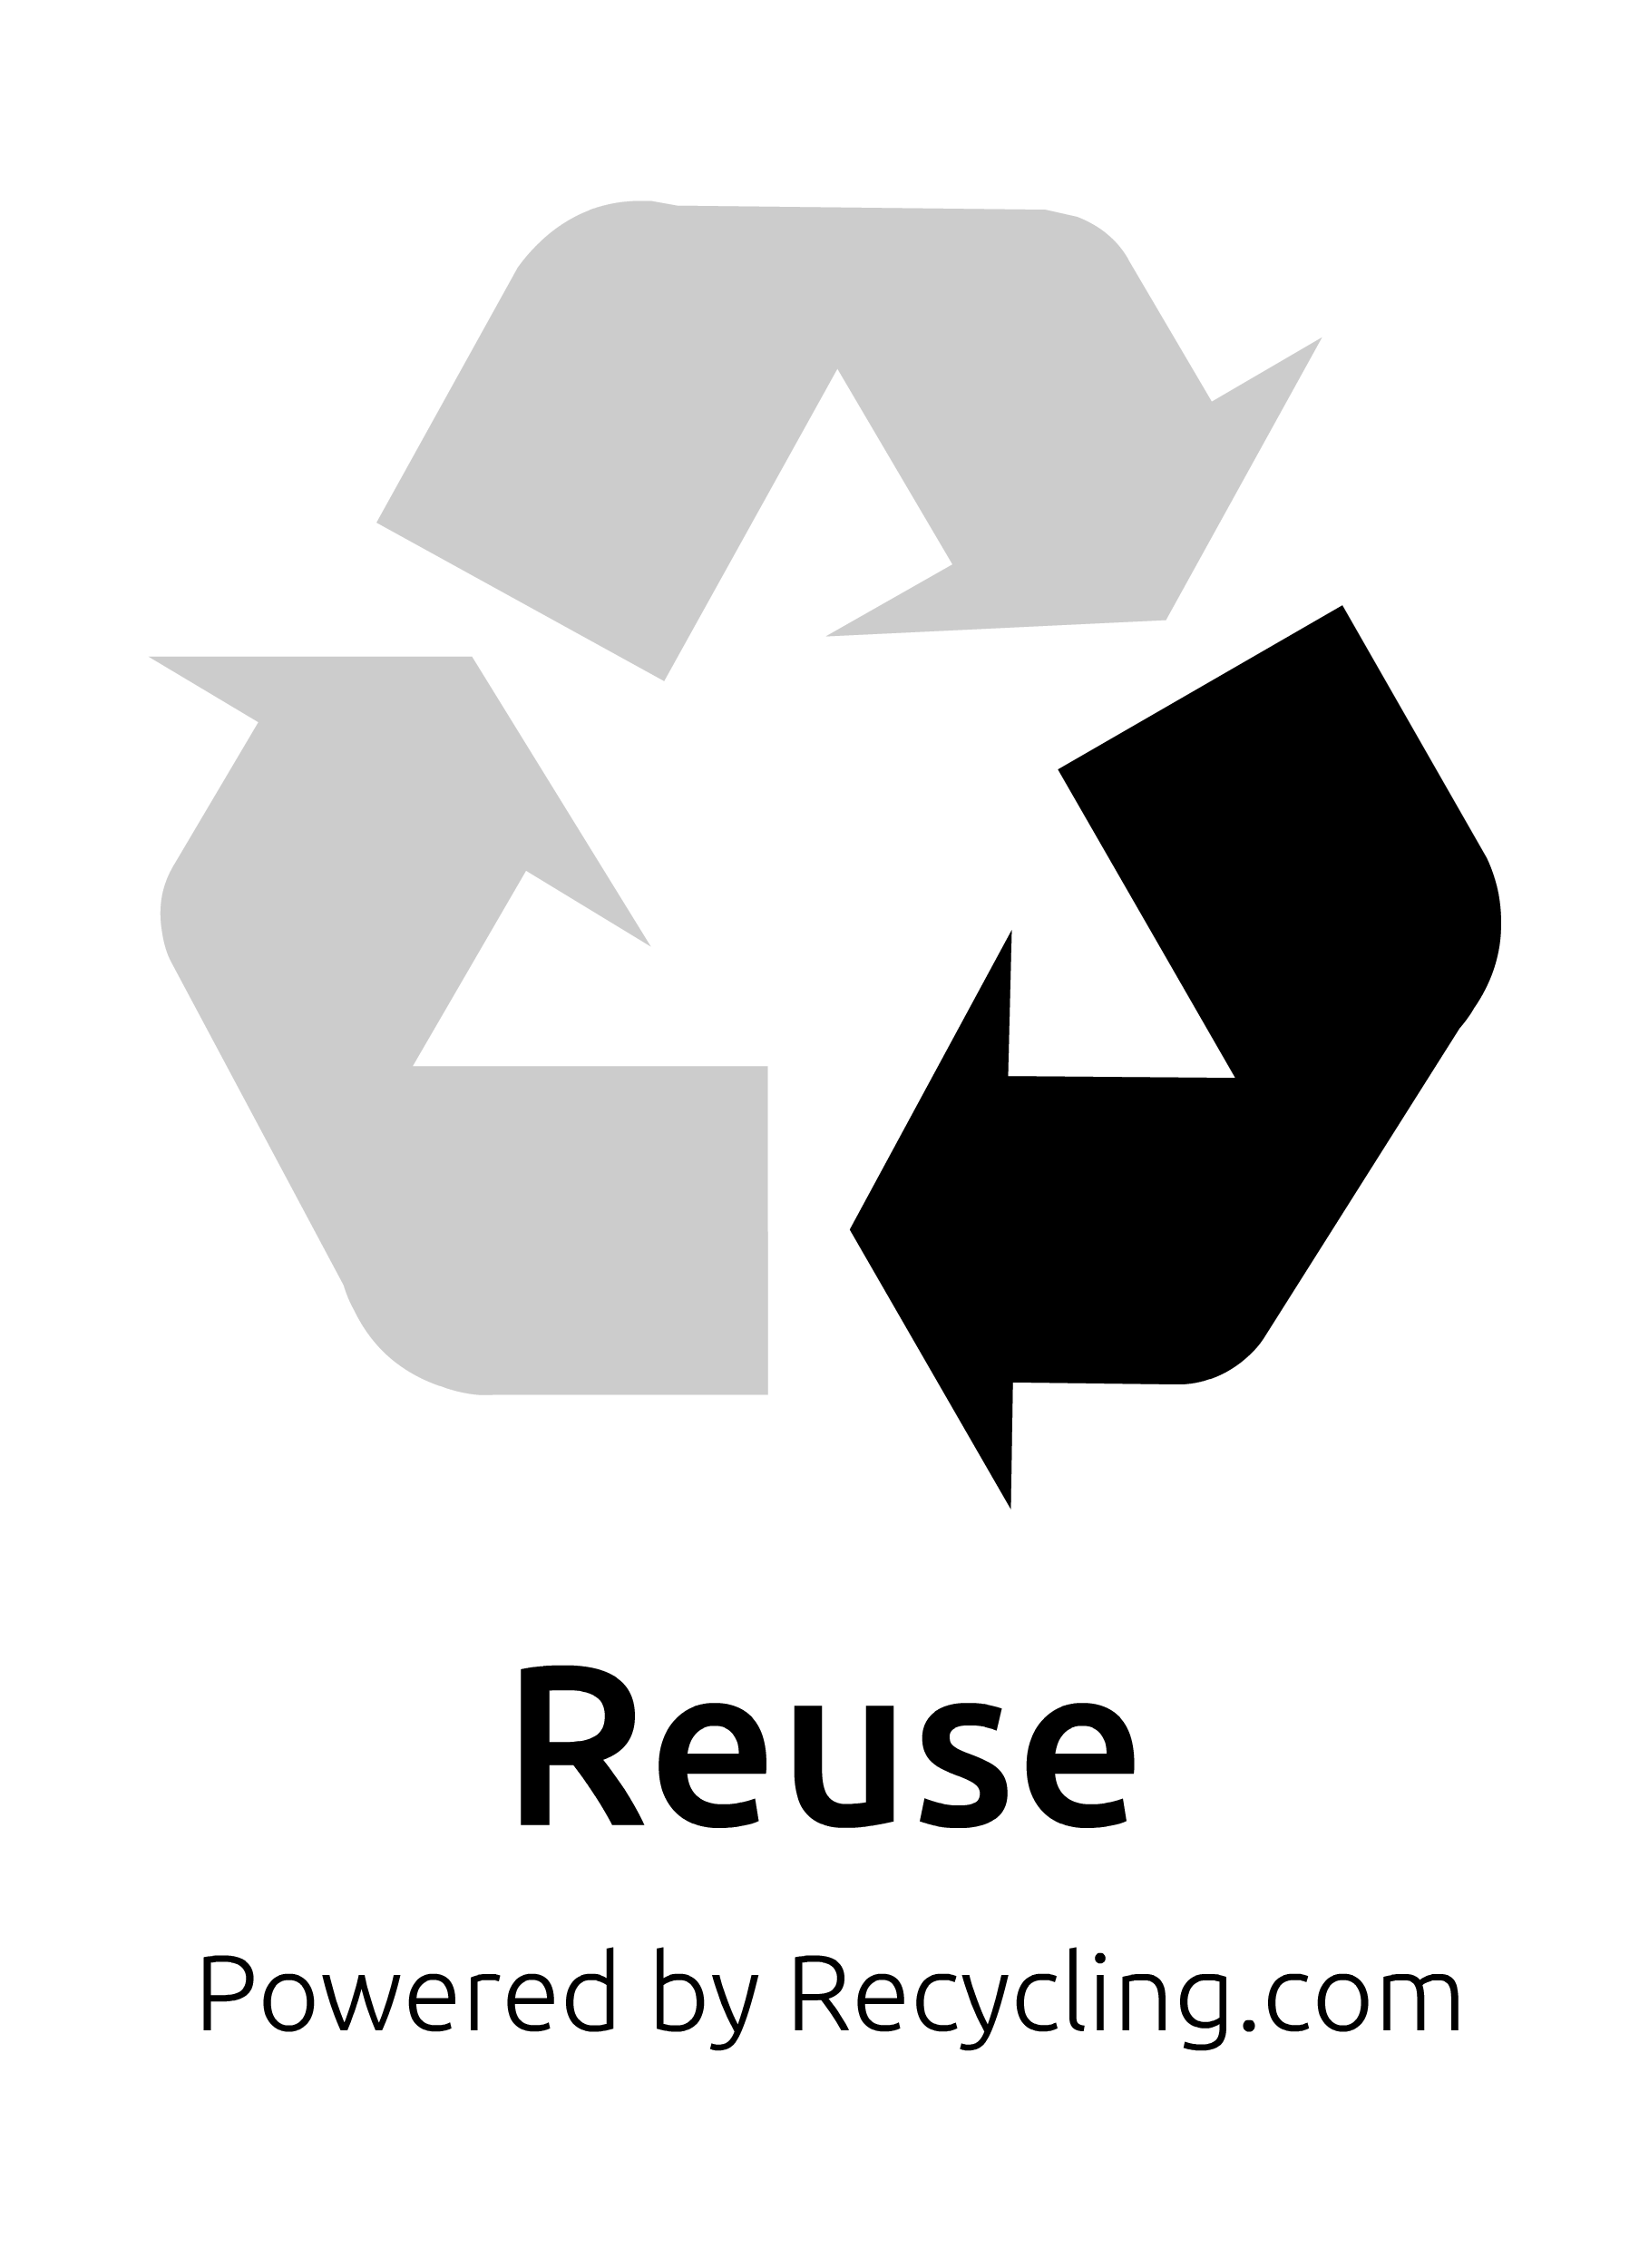 Black and White Recycle Logo - The Recycling Trilogy - Reduce, Reuse, Recycle | Download